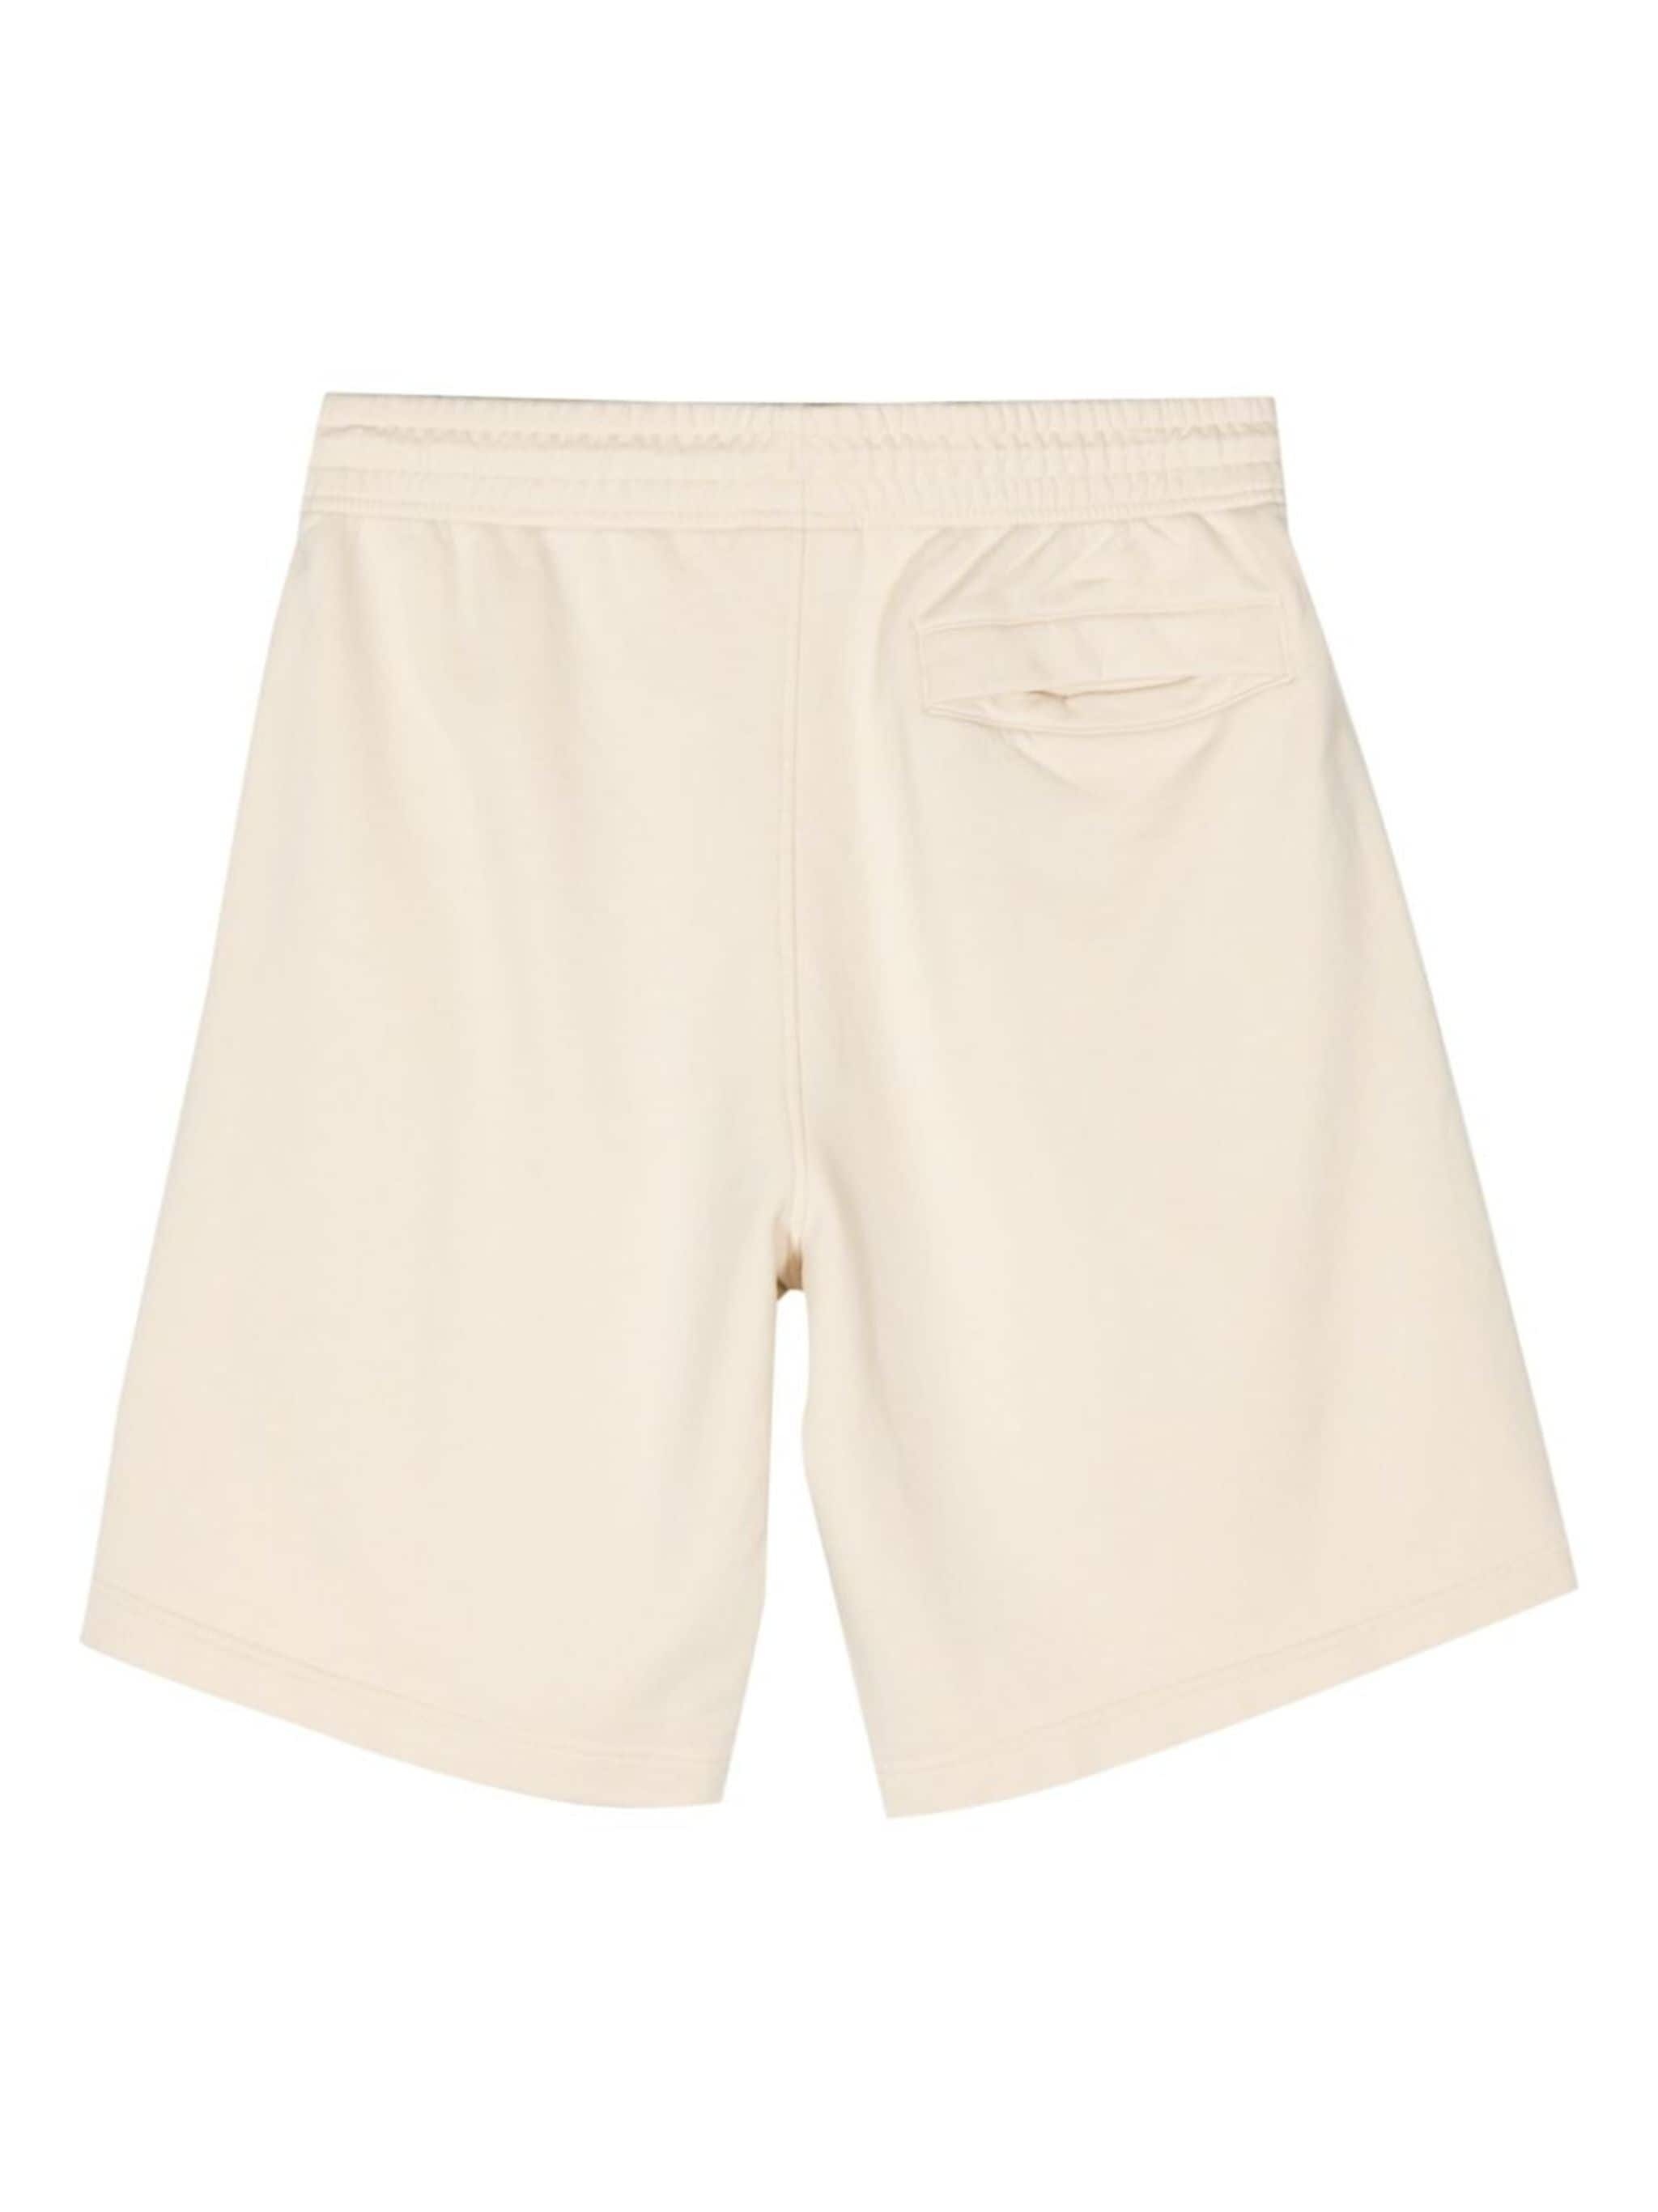 fox-patch track shorts - 2